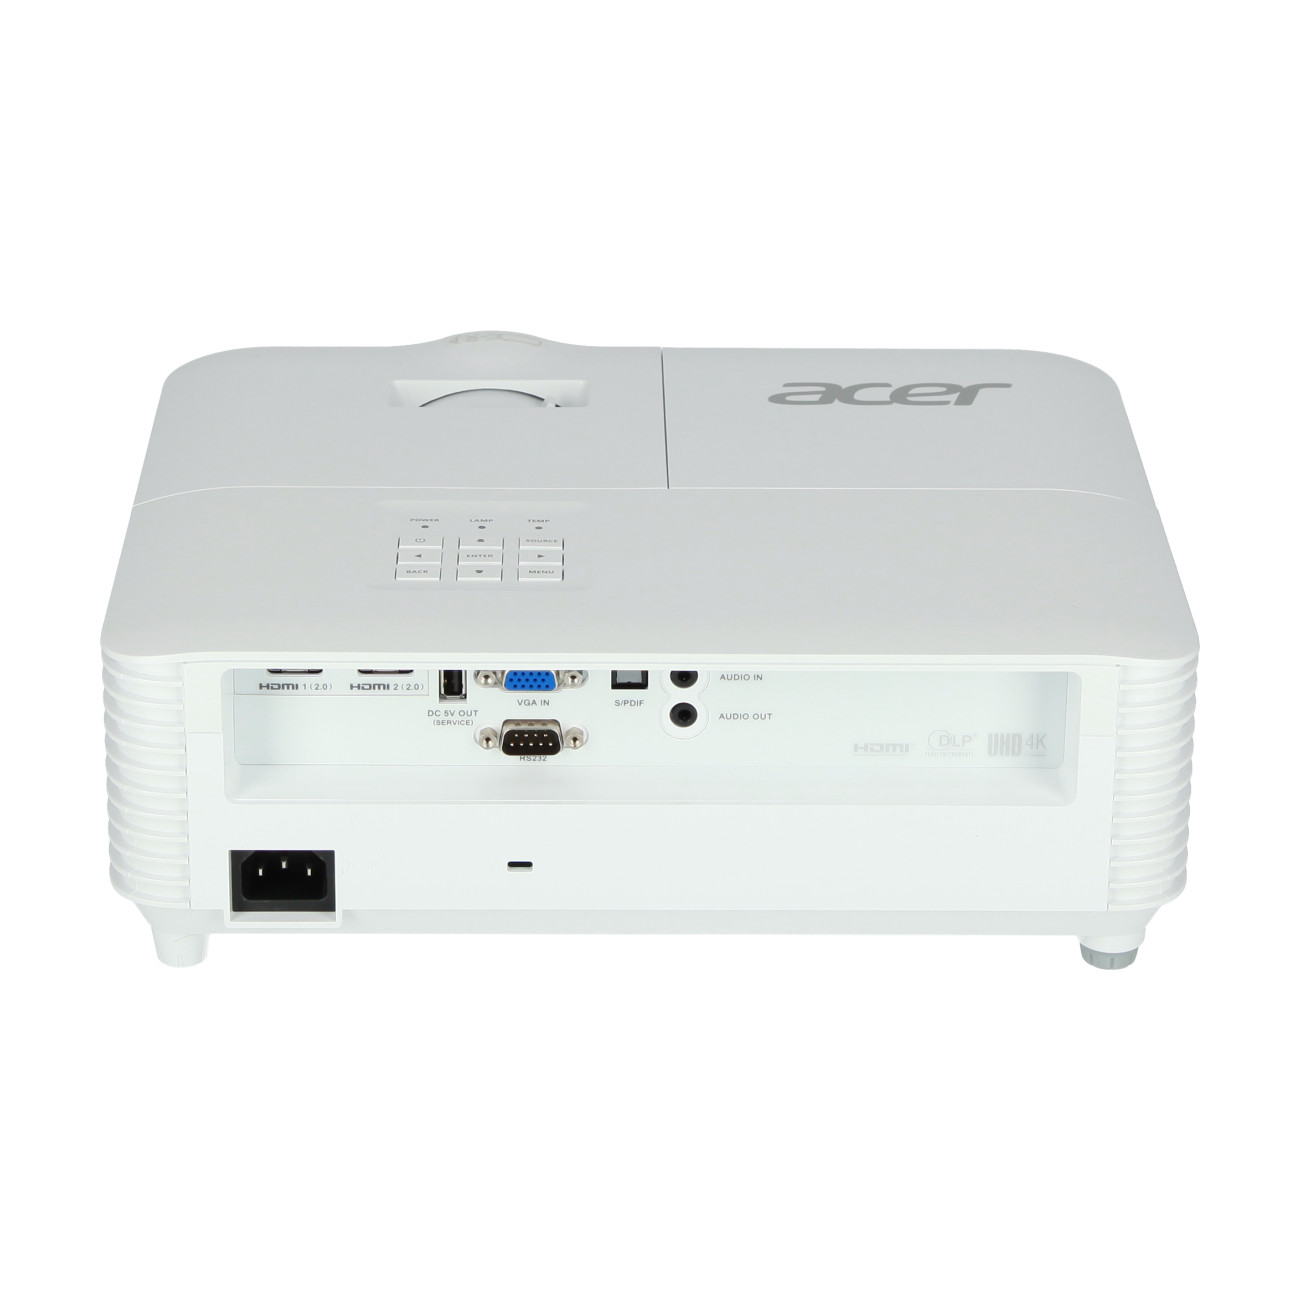 Acer-H6815ATV-Smart-mit-Android-Box-Demoware-Gold